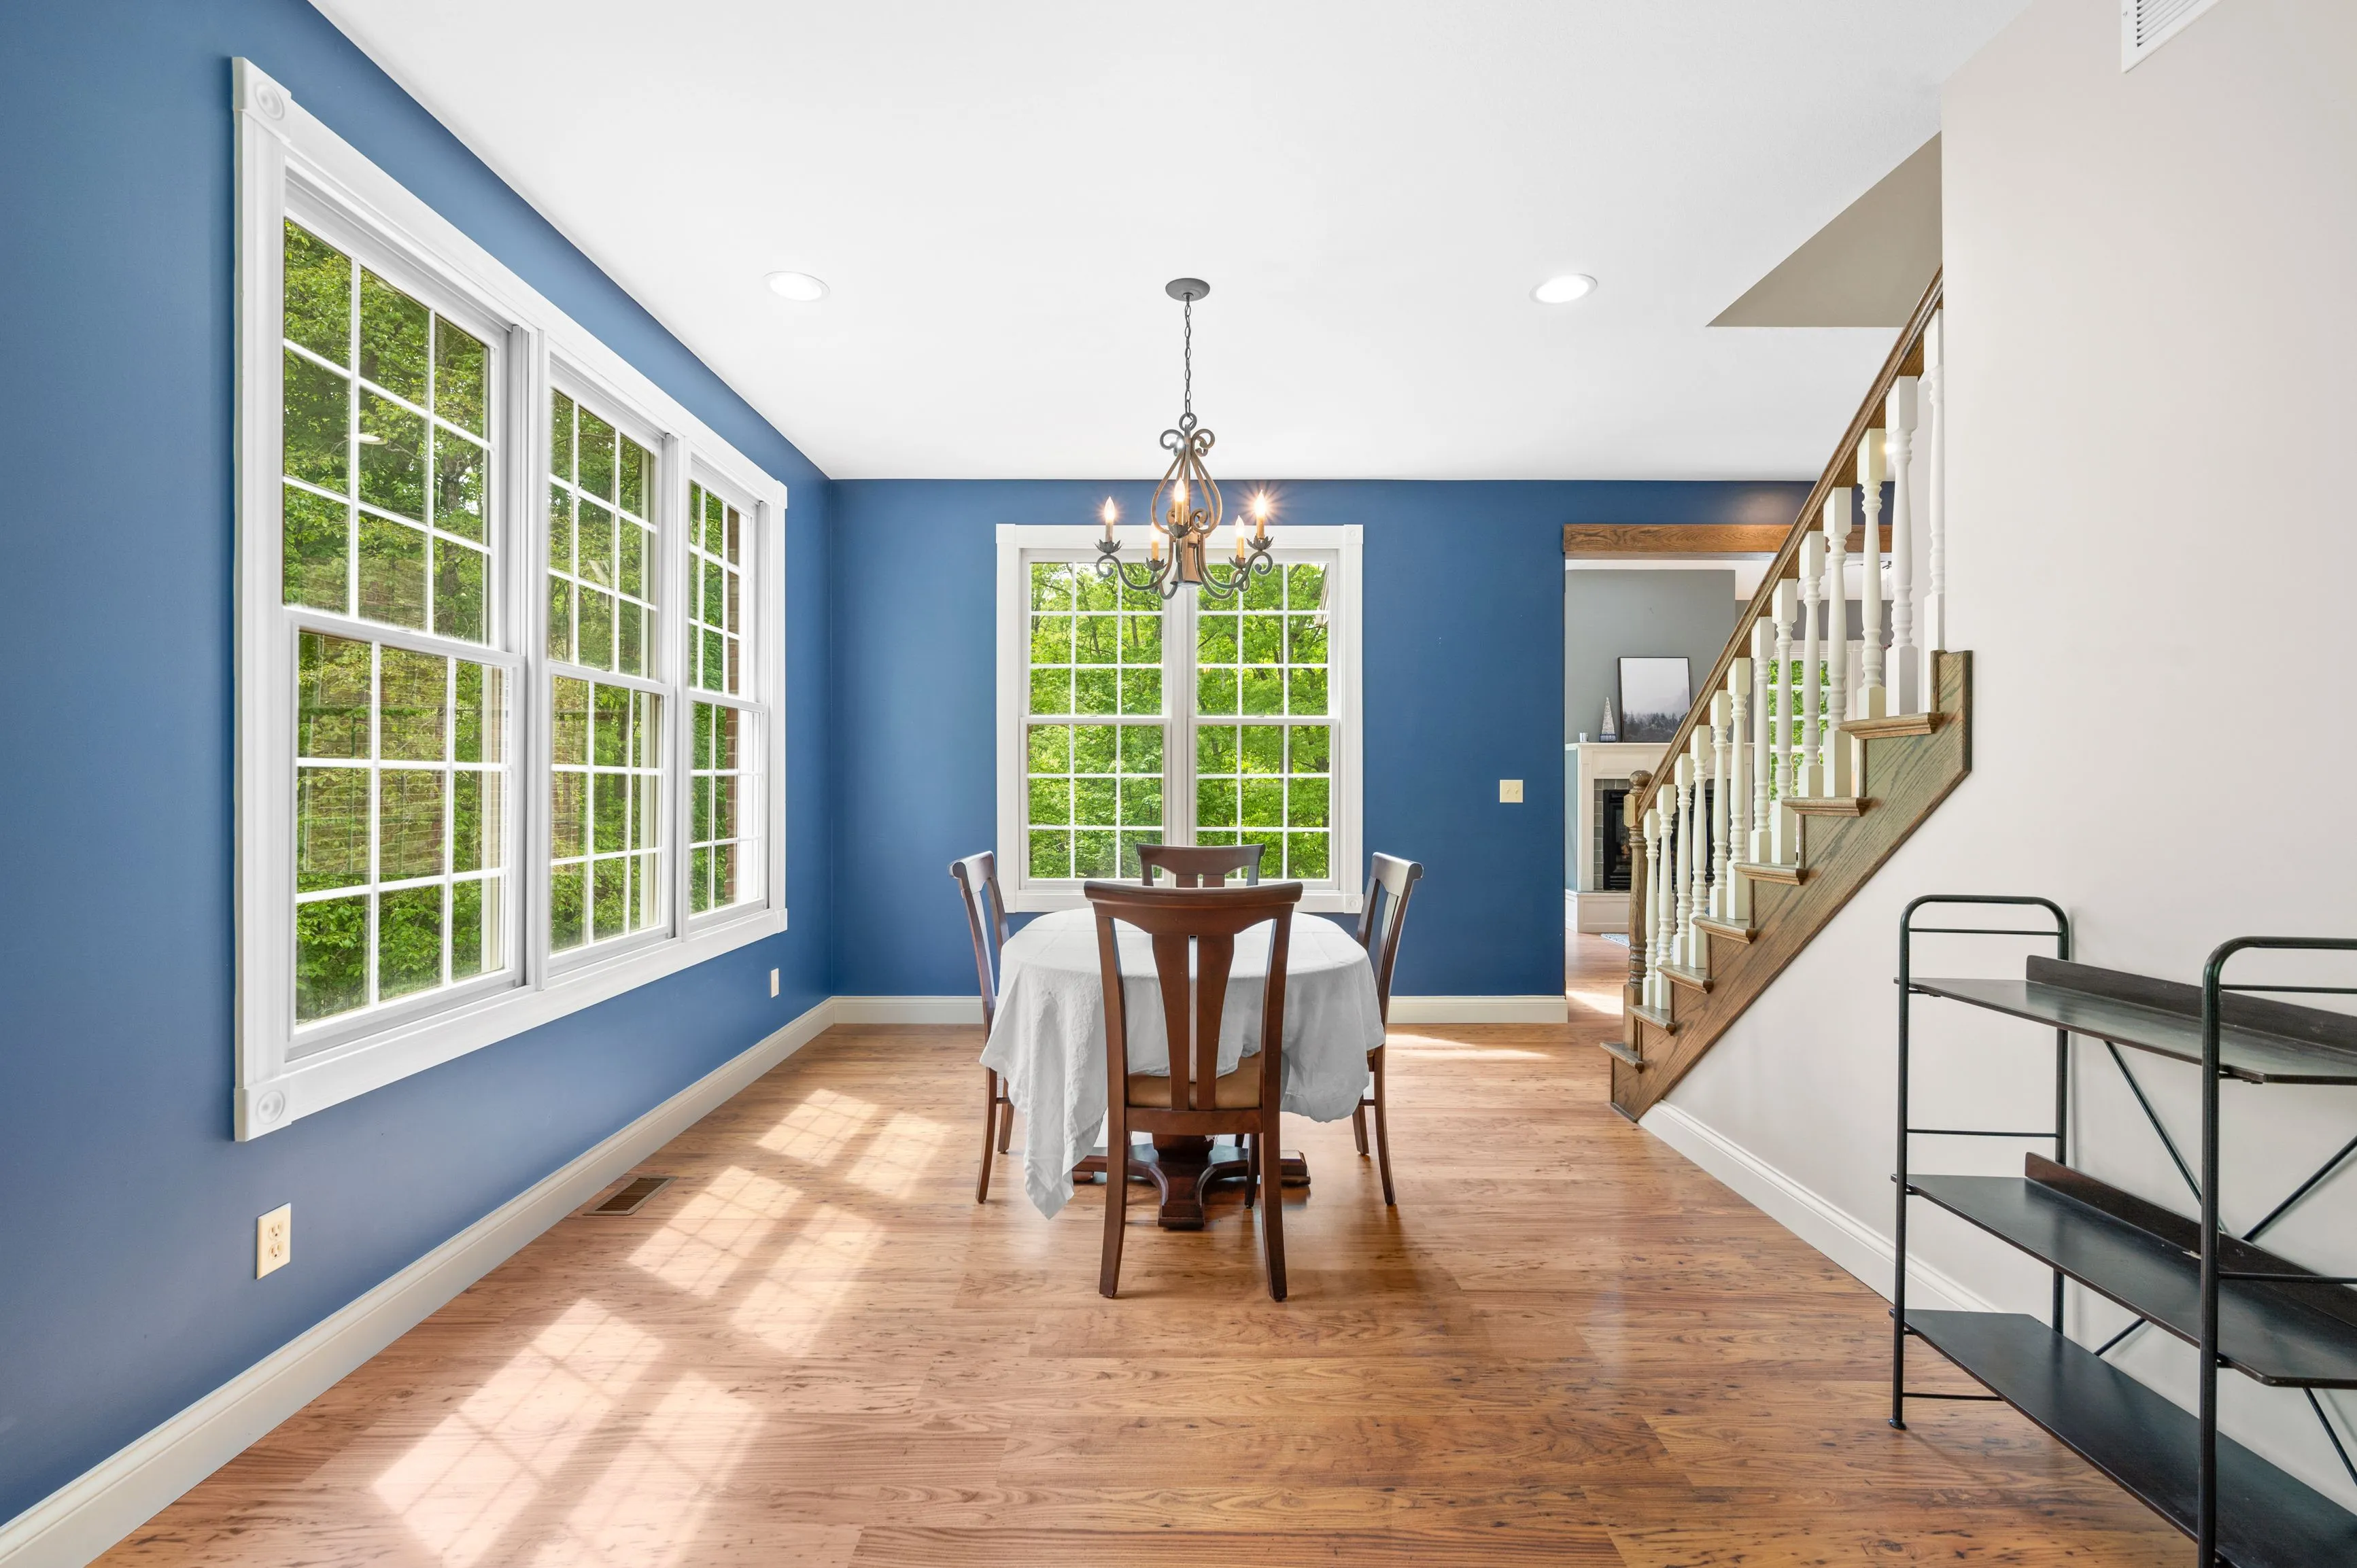 Bright dining room with blue walls, hardwood floors, large windows, a wooden dining table with chairs, and an adjacent staircase.